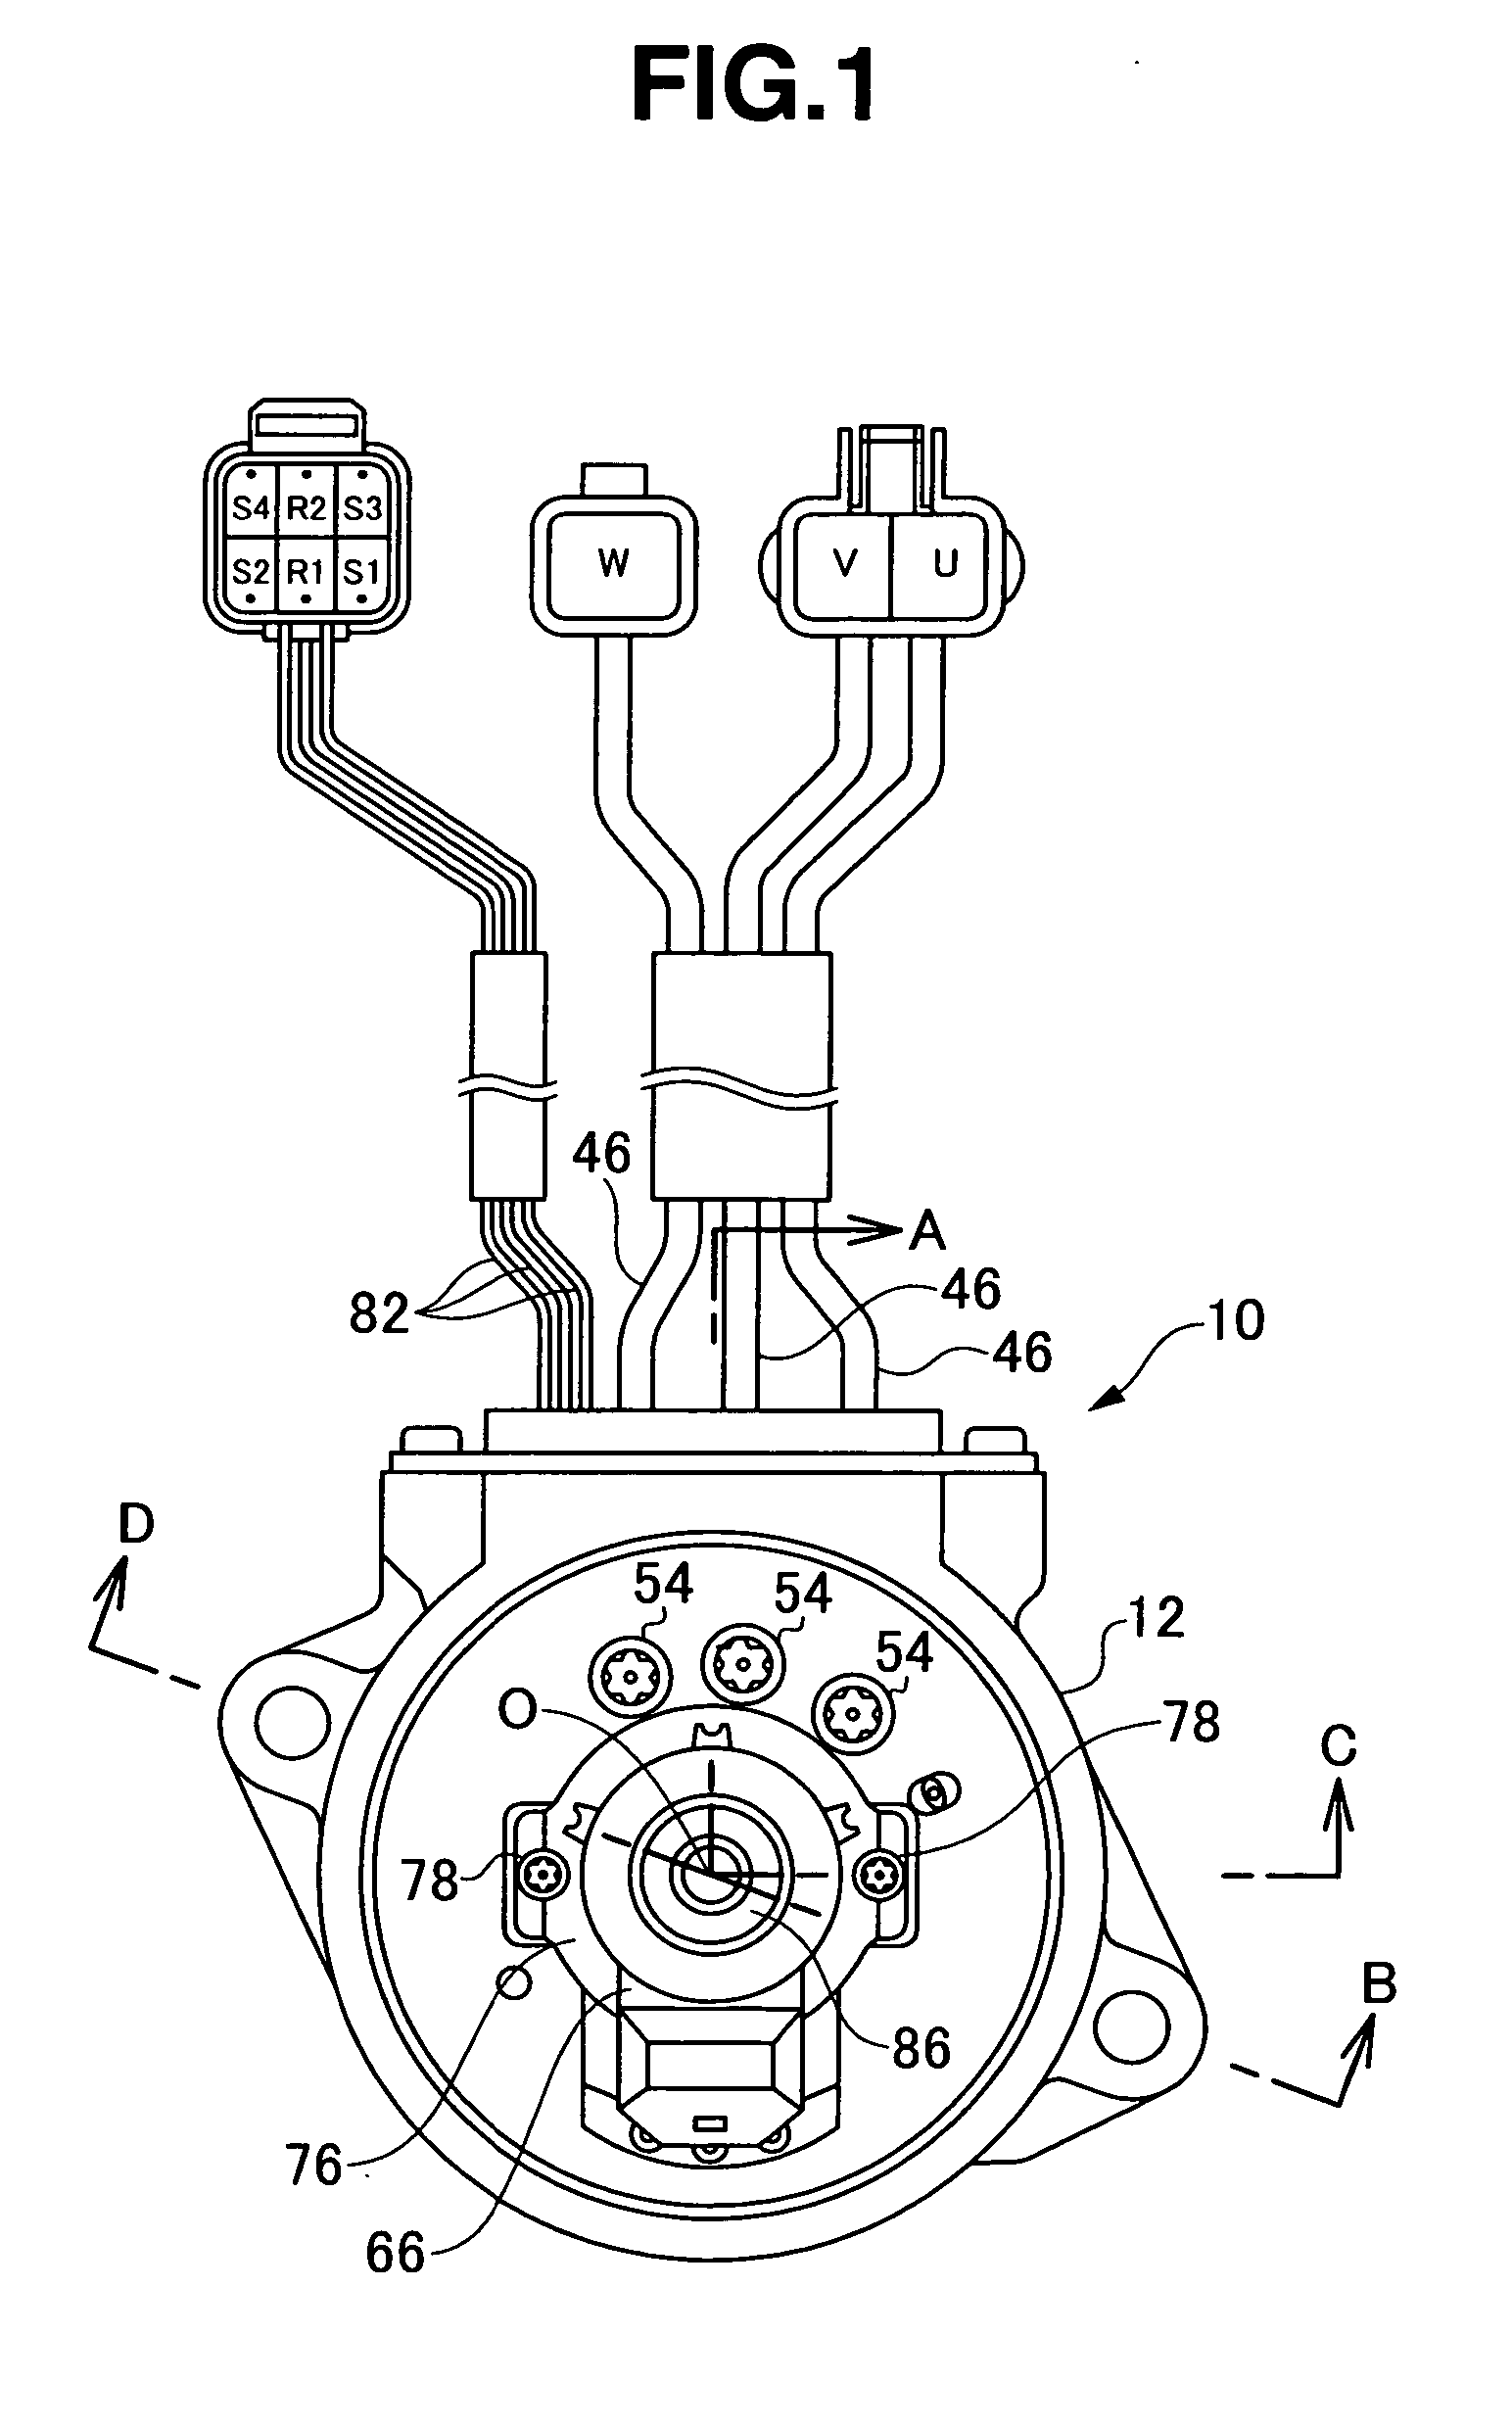 Attaching structure of resolver, dynamo-electric machine and attaching method of resolver